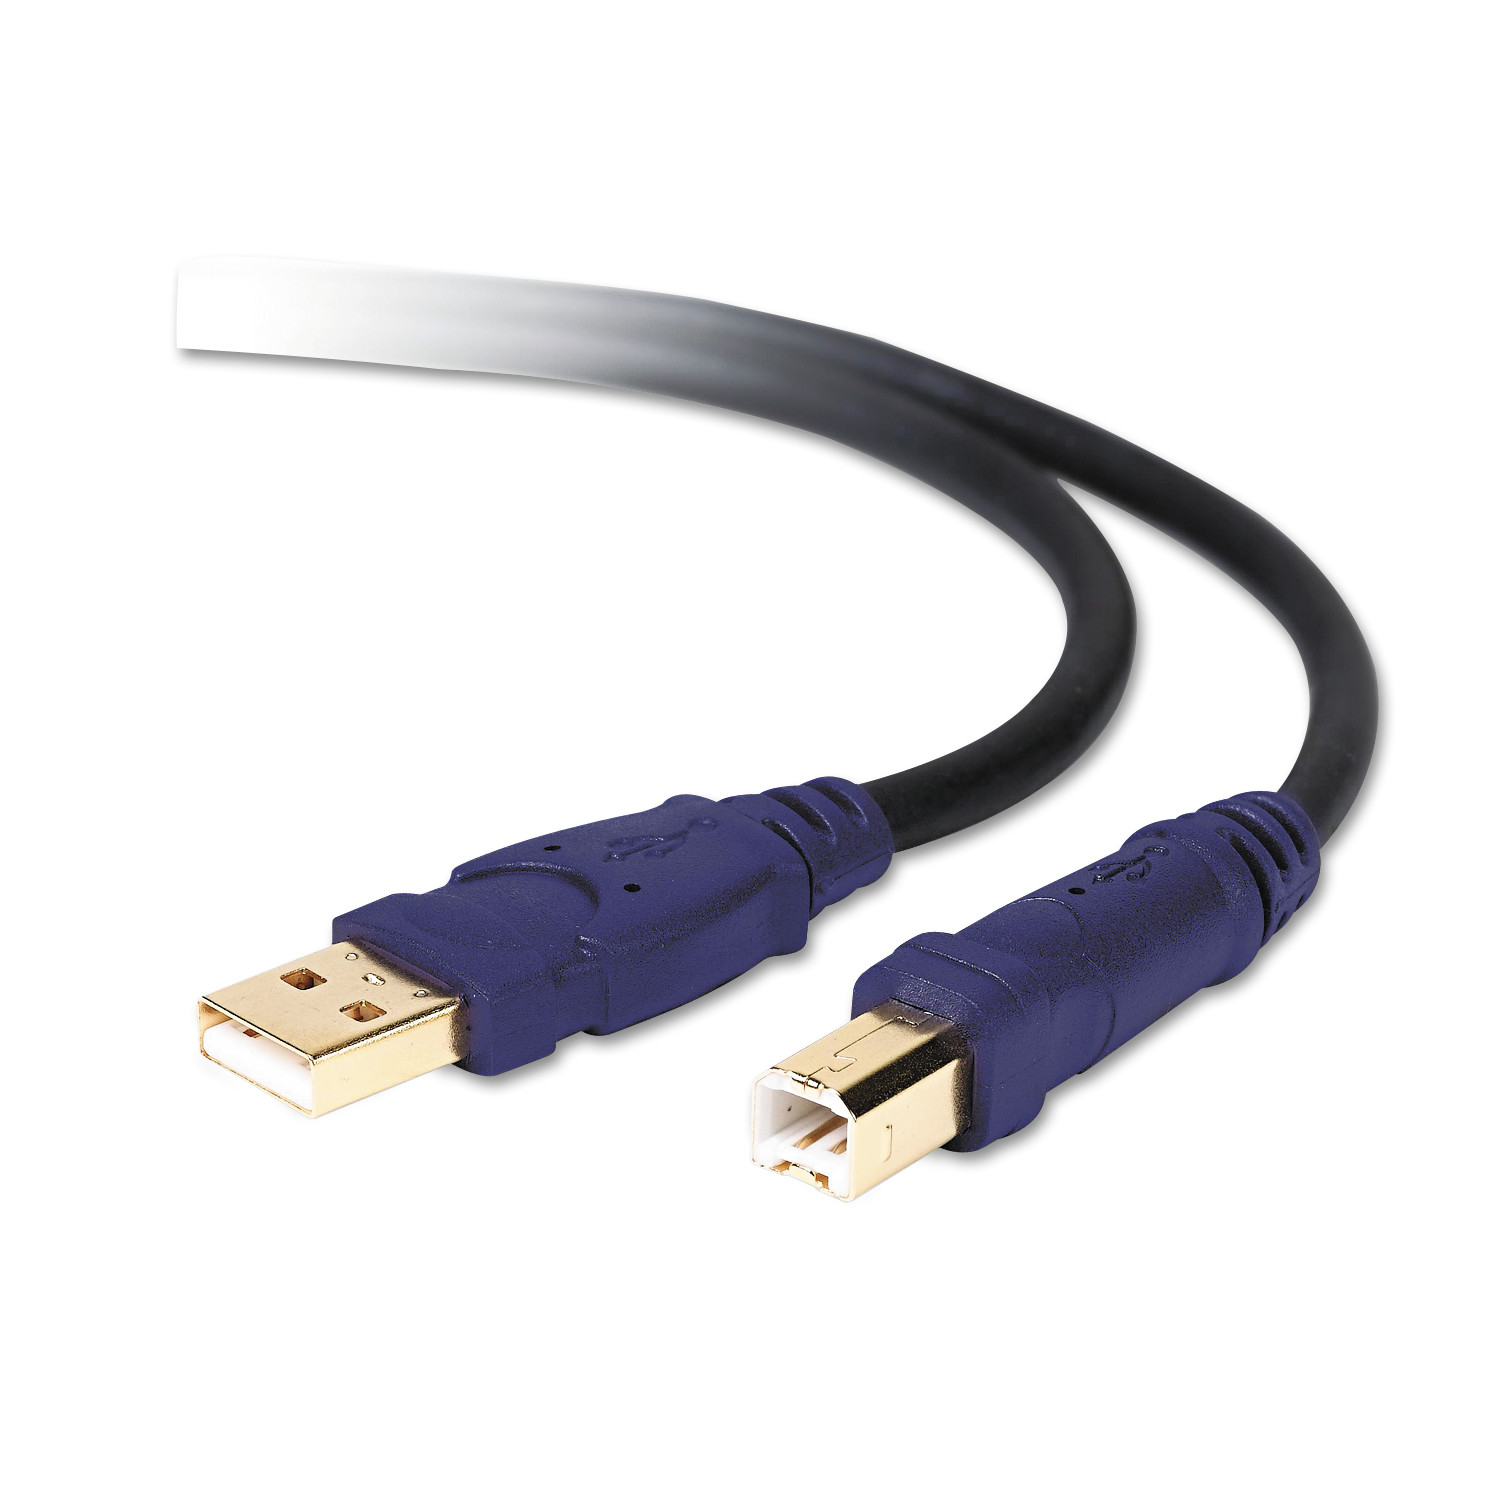 Belkin Gold Series High-Speed USB 2.0 Cable, 10 ft., Black/Blue - image 1 of 2